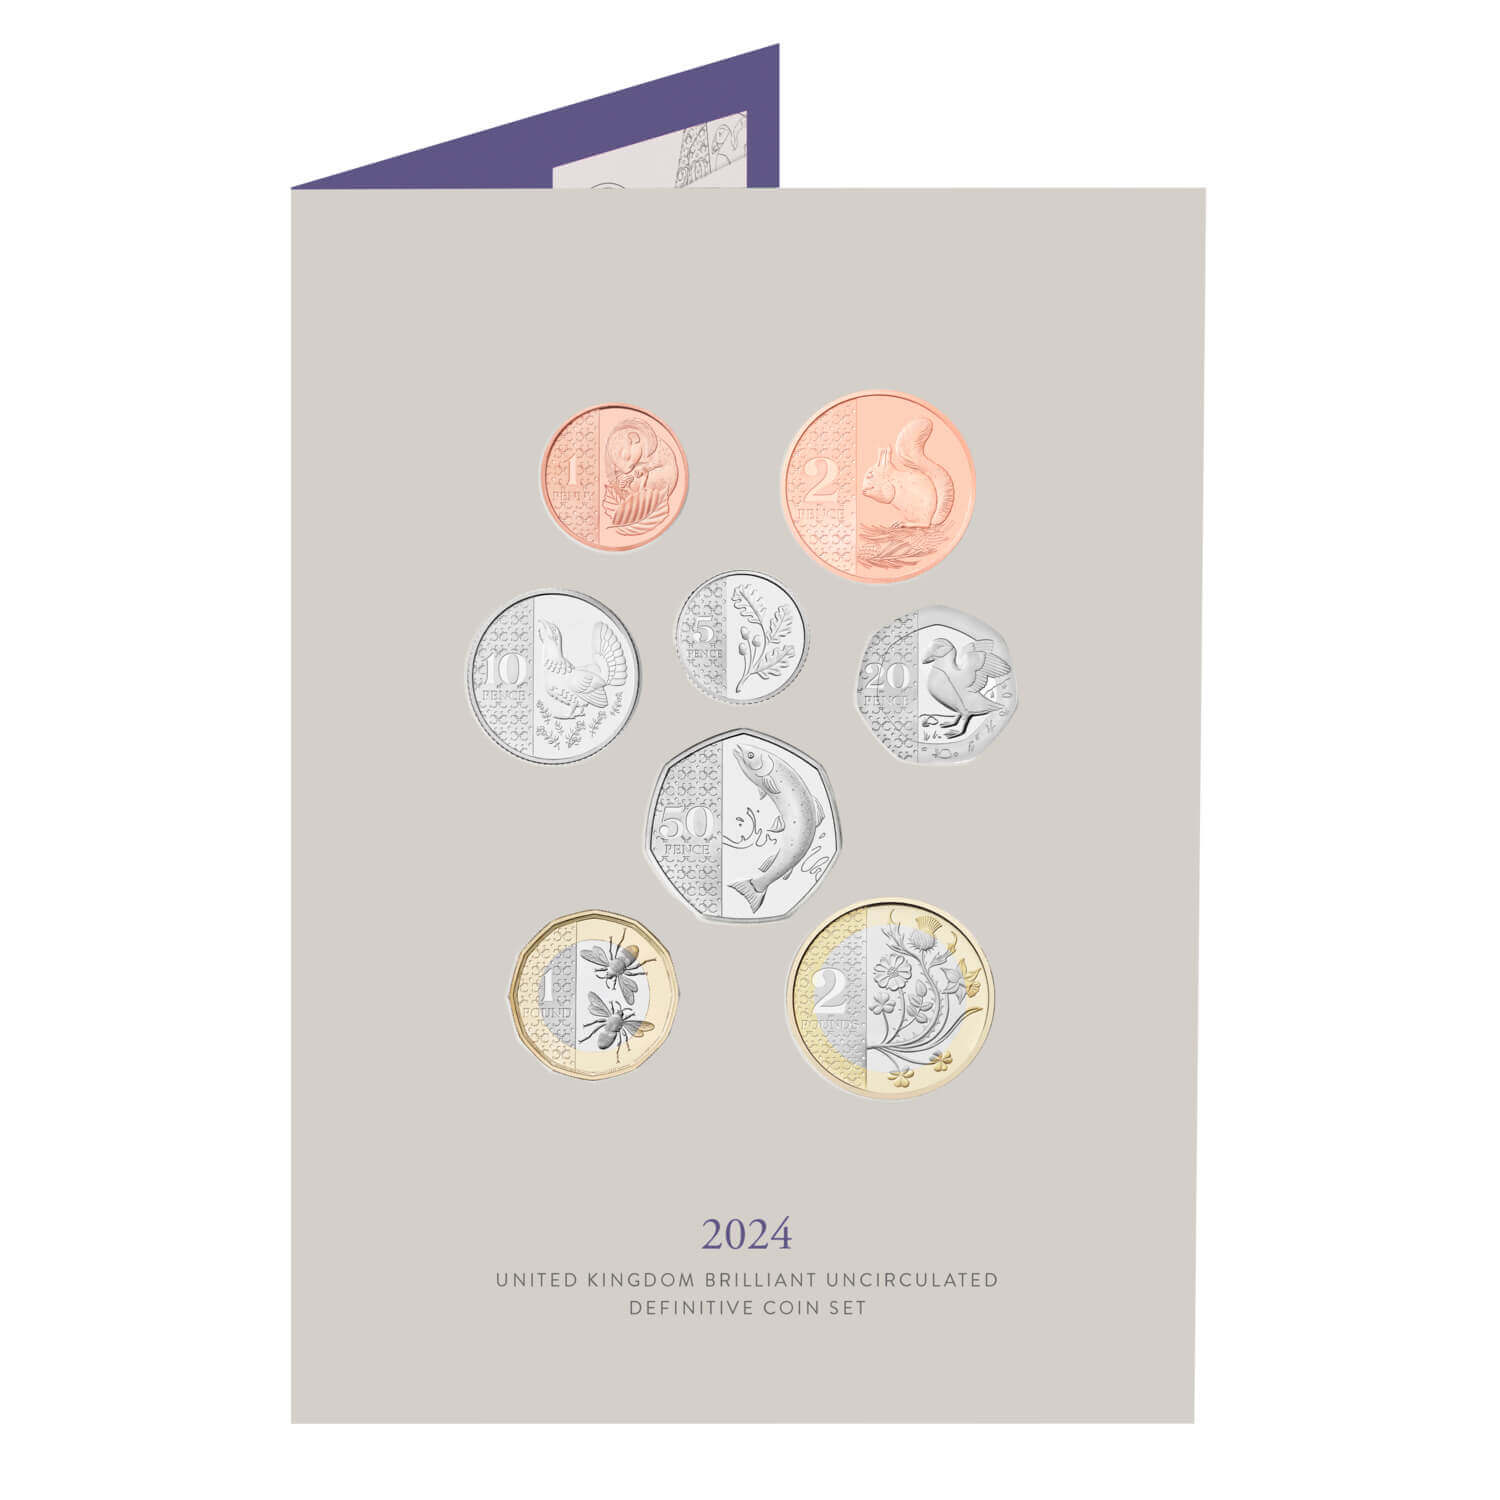 Duw24   The 2024 United Kingdom Brilliant Uncirculated Definitive Coin Set Front 1500x1500 F3a2c67 